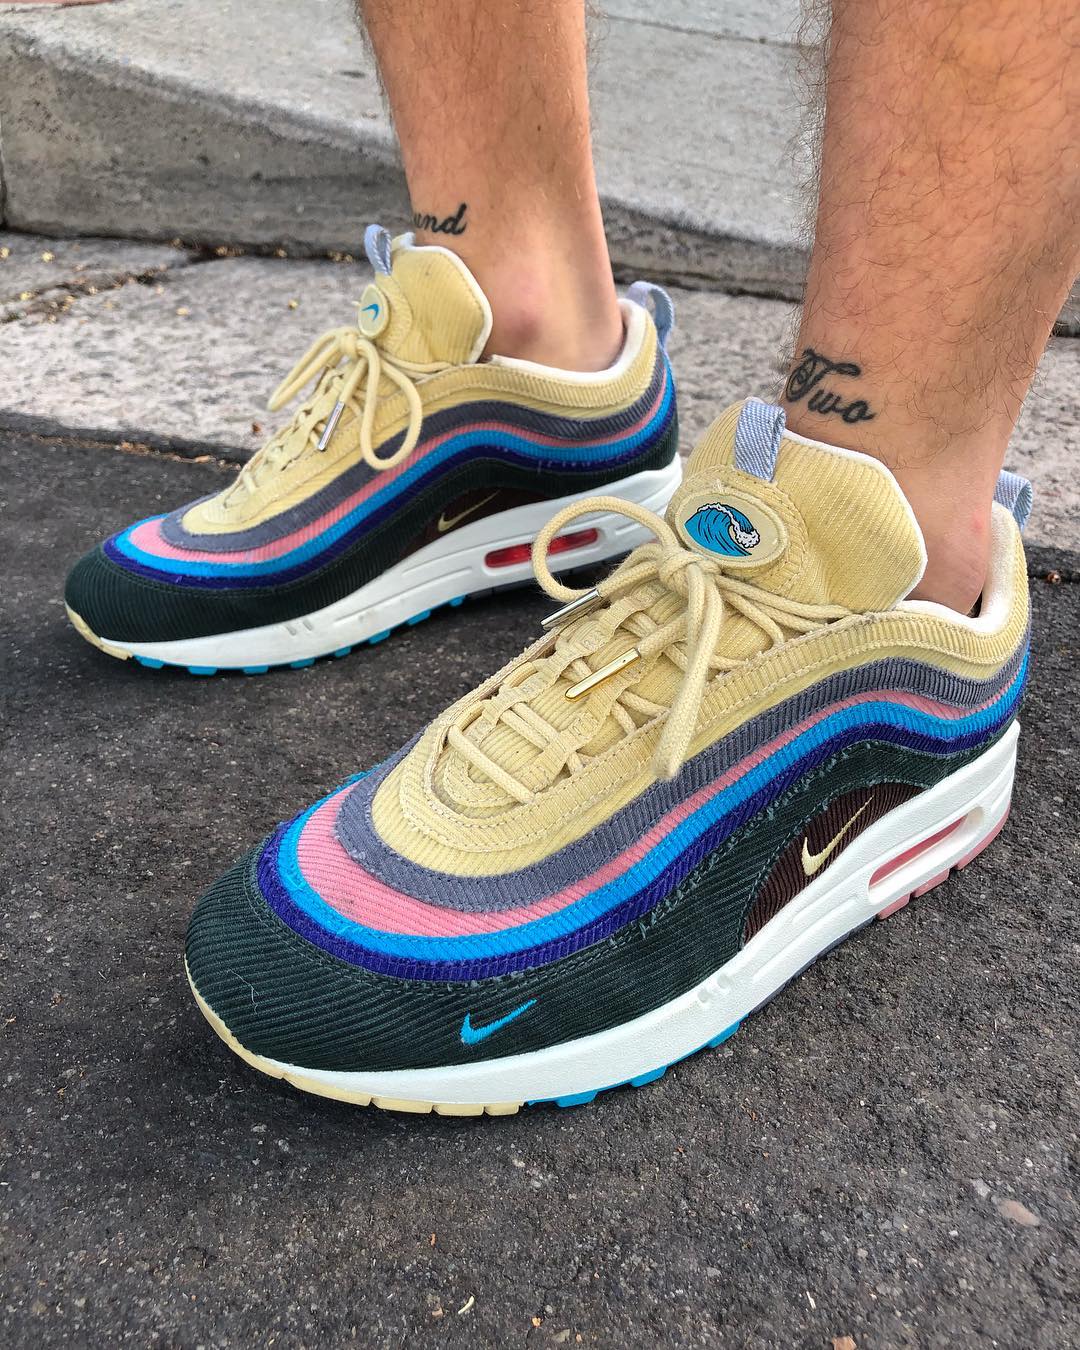 nike-air-max-1-97-sean-wotherspoon-release-20180324